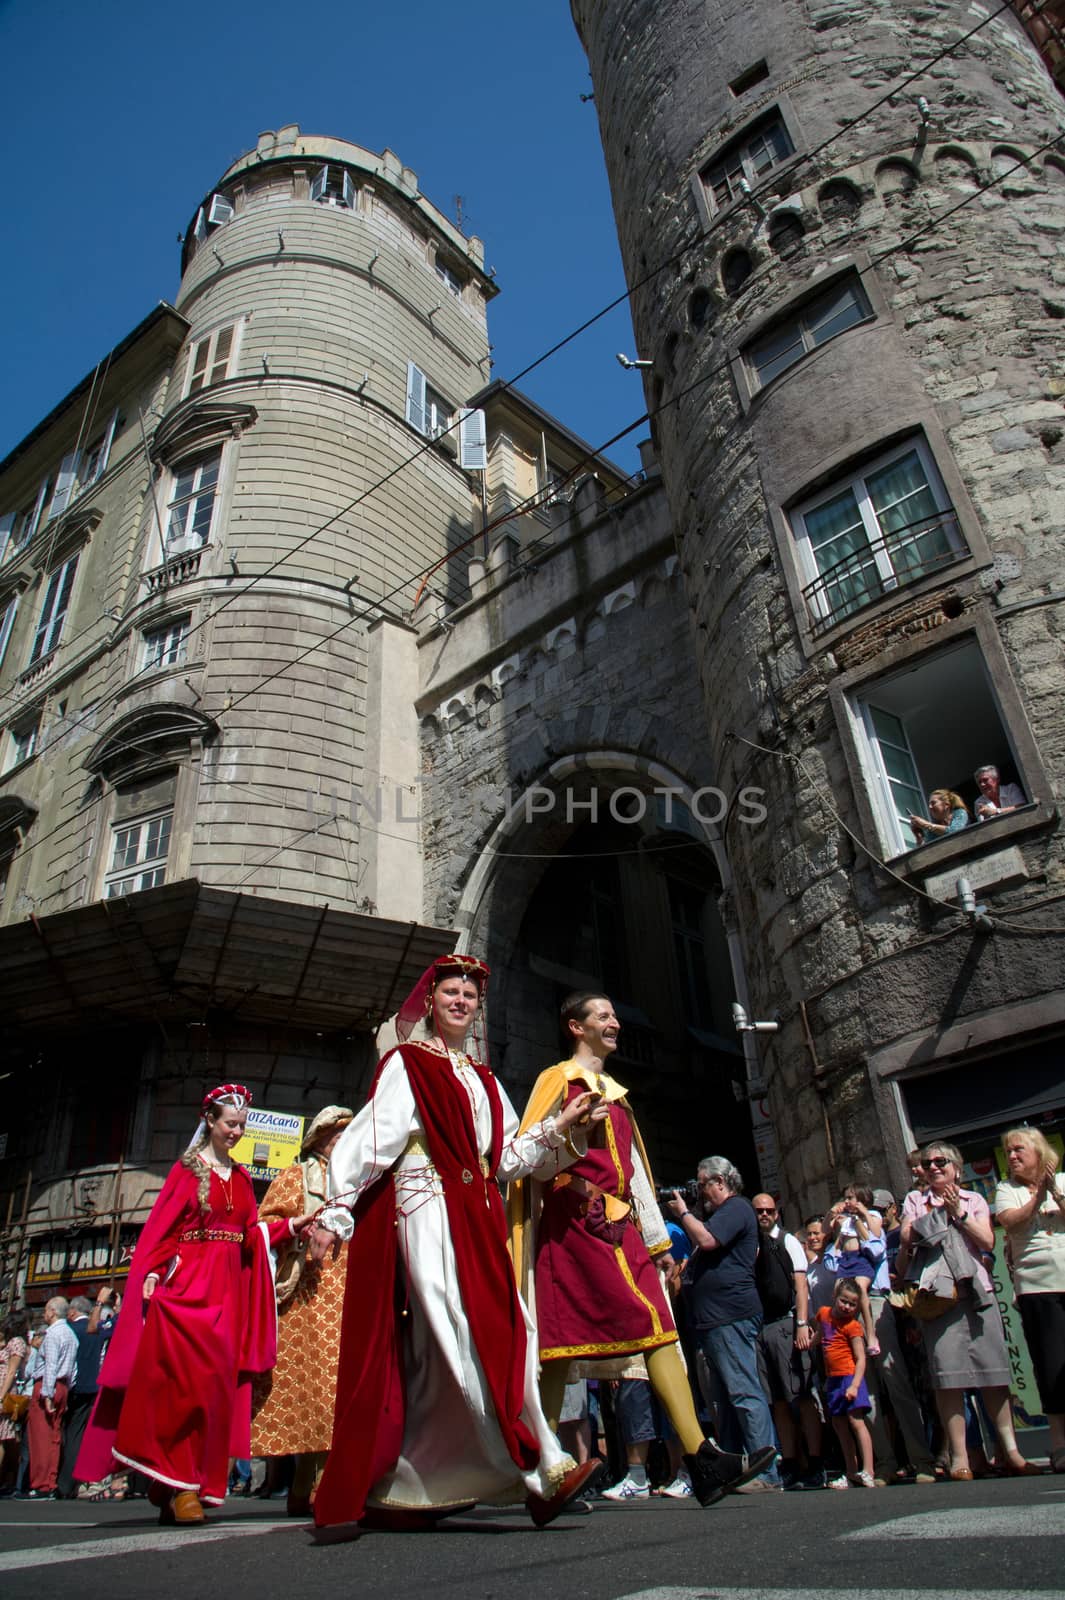 GENOA, ITALY - 8 JUNE 2014 - Unidentified people during the historical parade of the Maritime Republics Palio